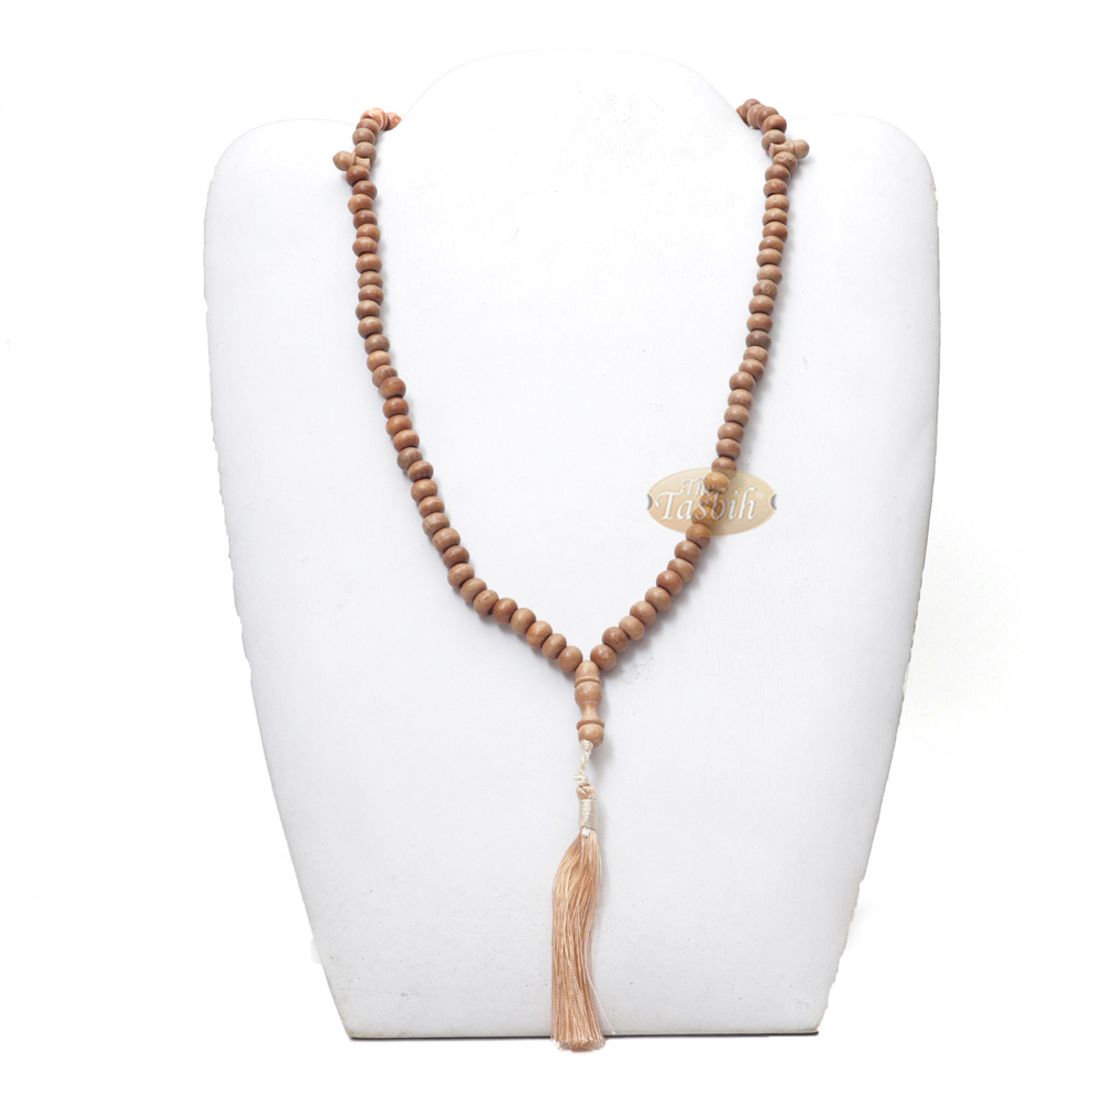 Low-price Handcrafted Brown Rustic Coffee Wood Tasbih Prayer Beads With Strong Soft Tassels